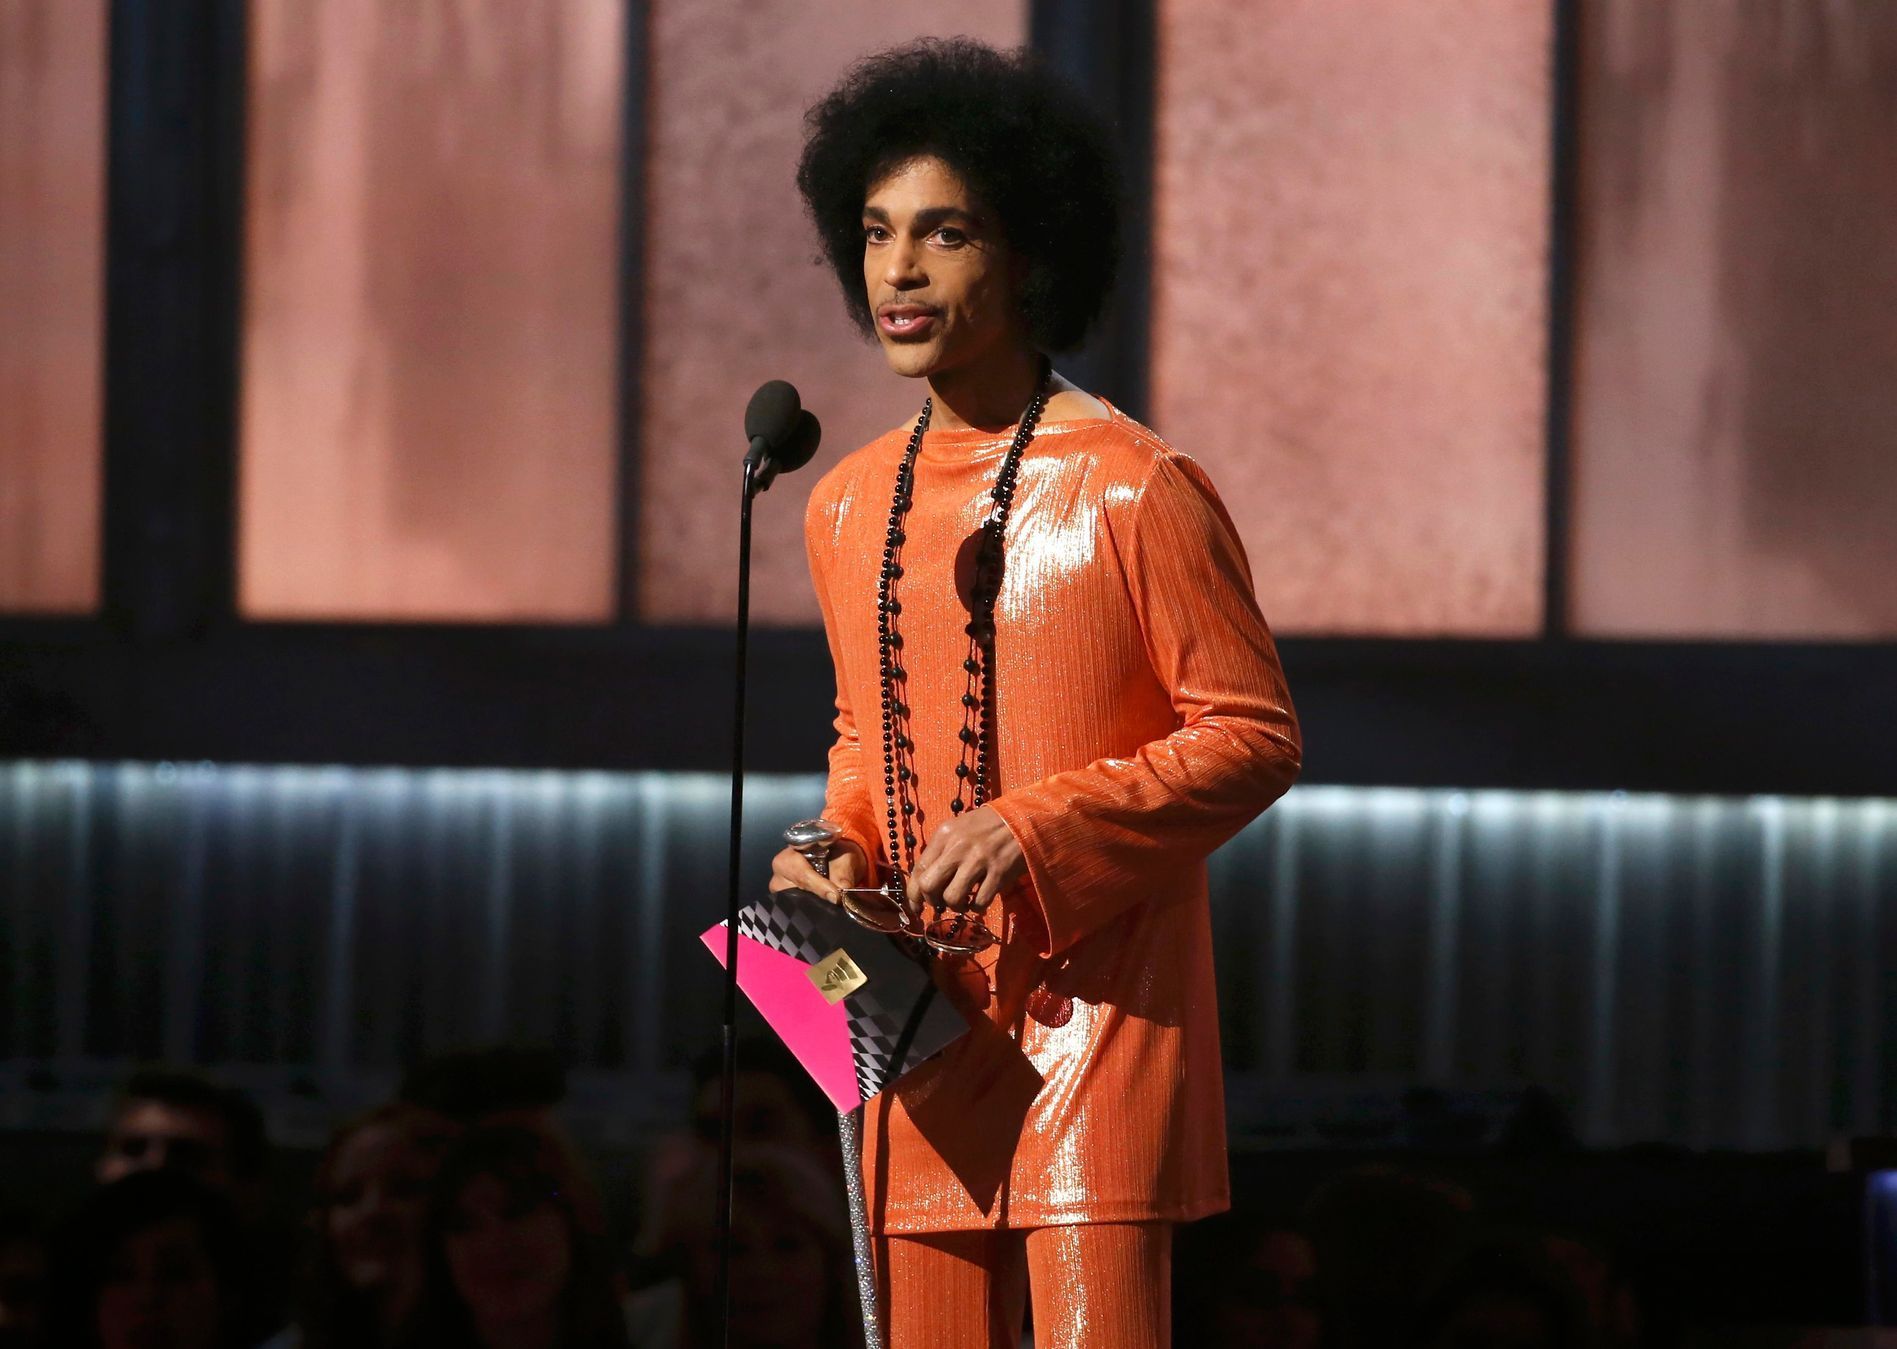 Prince presents the award for album of the year at the 57th annual Grammy Awards in Los Angeles